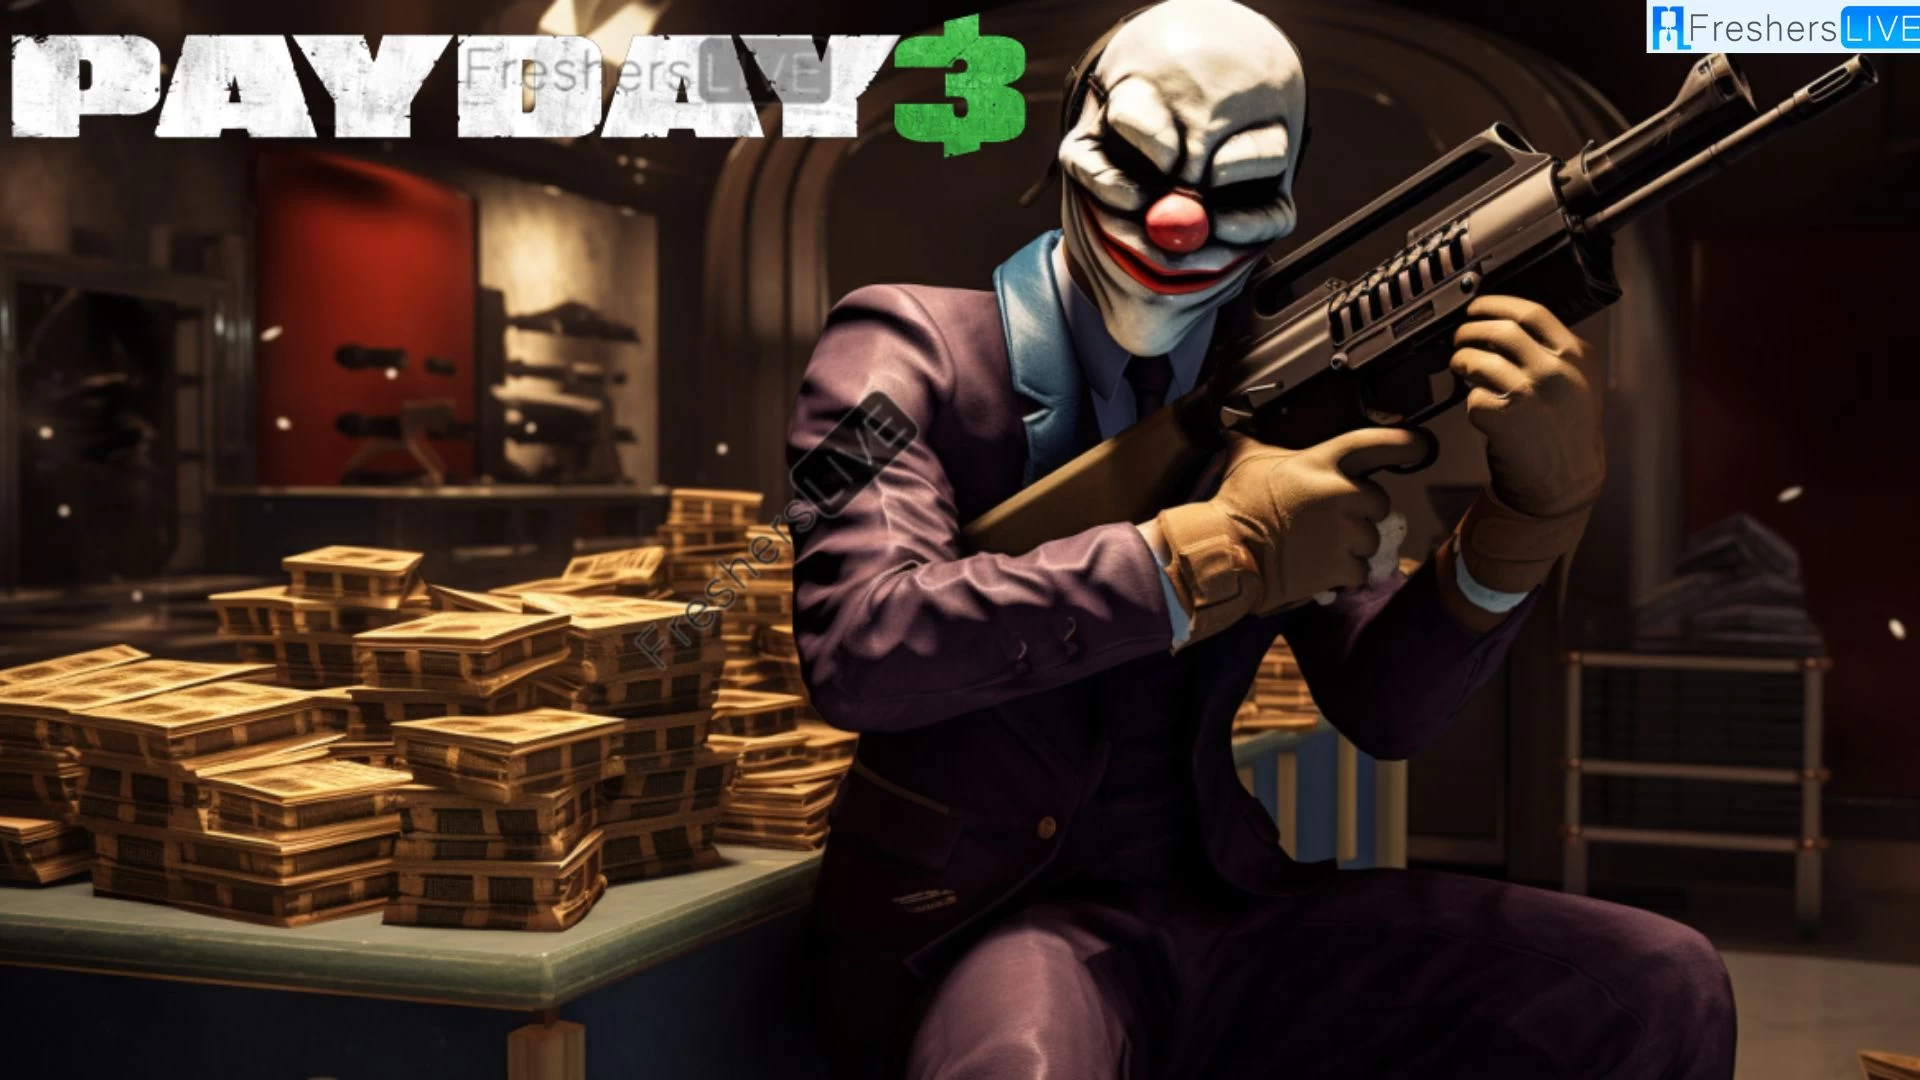 Payday 3 Under The Surface Safe Location, Payday 3 Gameplay, Trailer and More